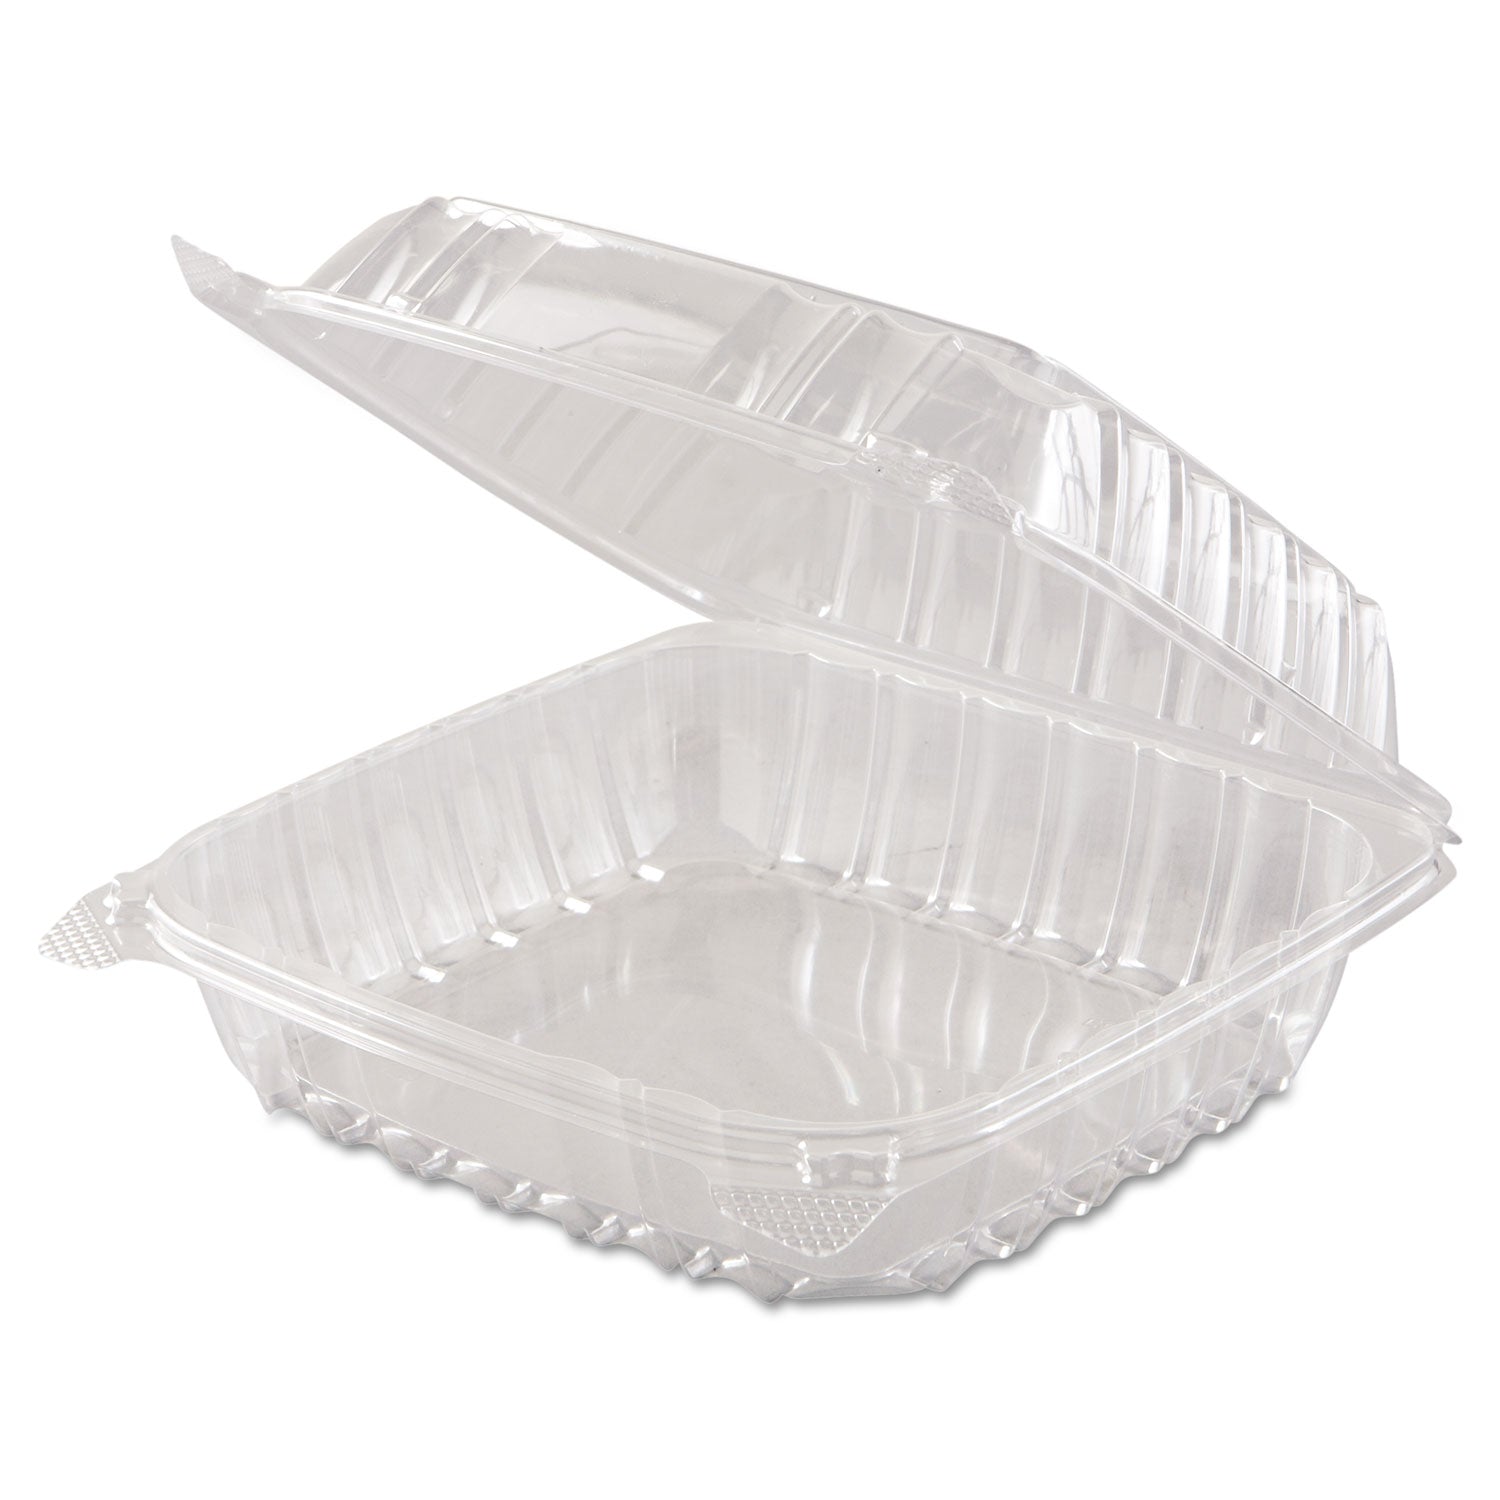 ClearSeal Hinged-Lid Plastic Containers, 8.3 x 8.3 x 3, Clear, Plastic, 250/Carton - 